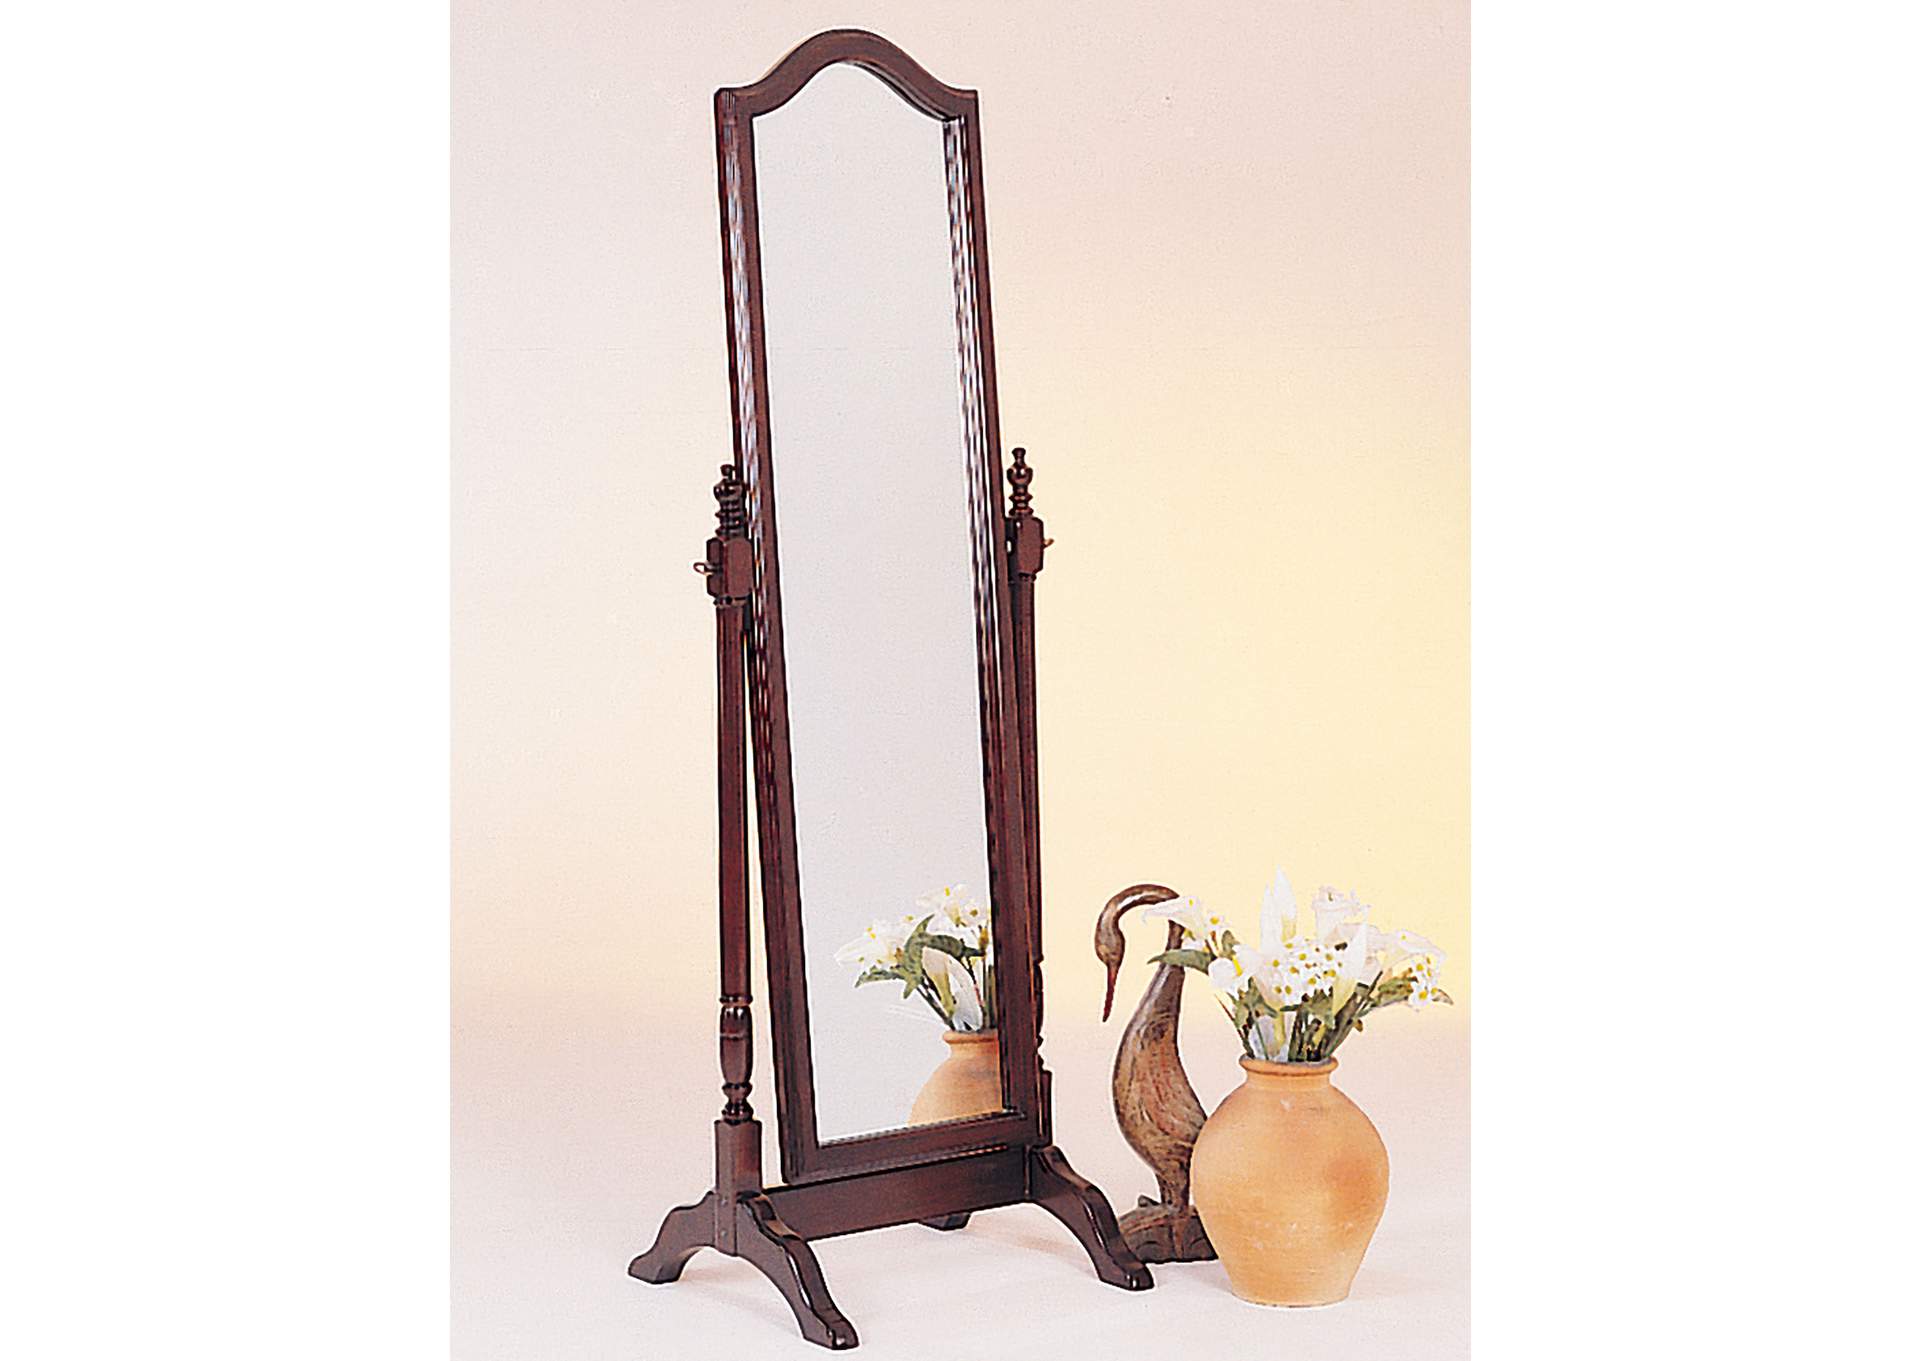 Cabot Rectangular Cheval Mirror with Arched Top Merlot,Coaster Furniture